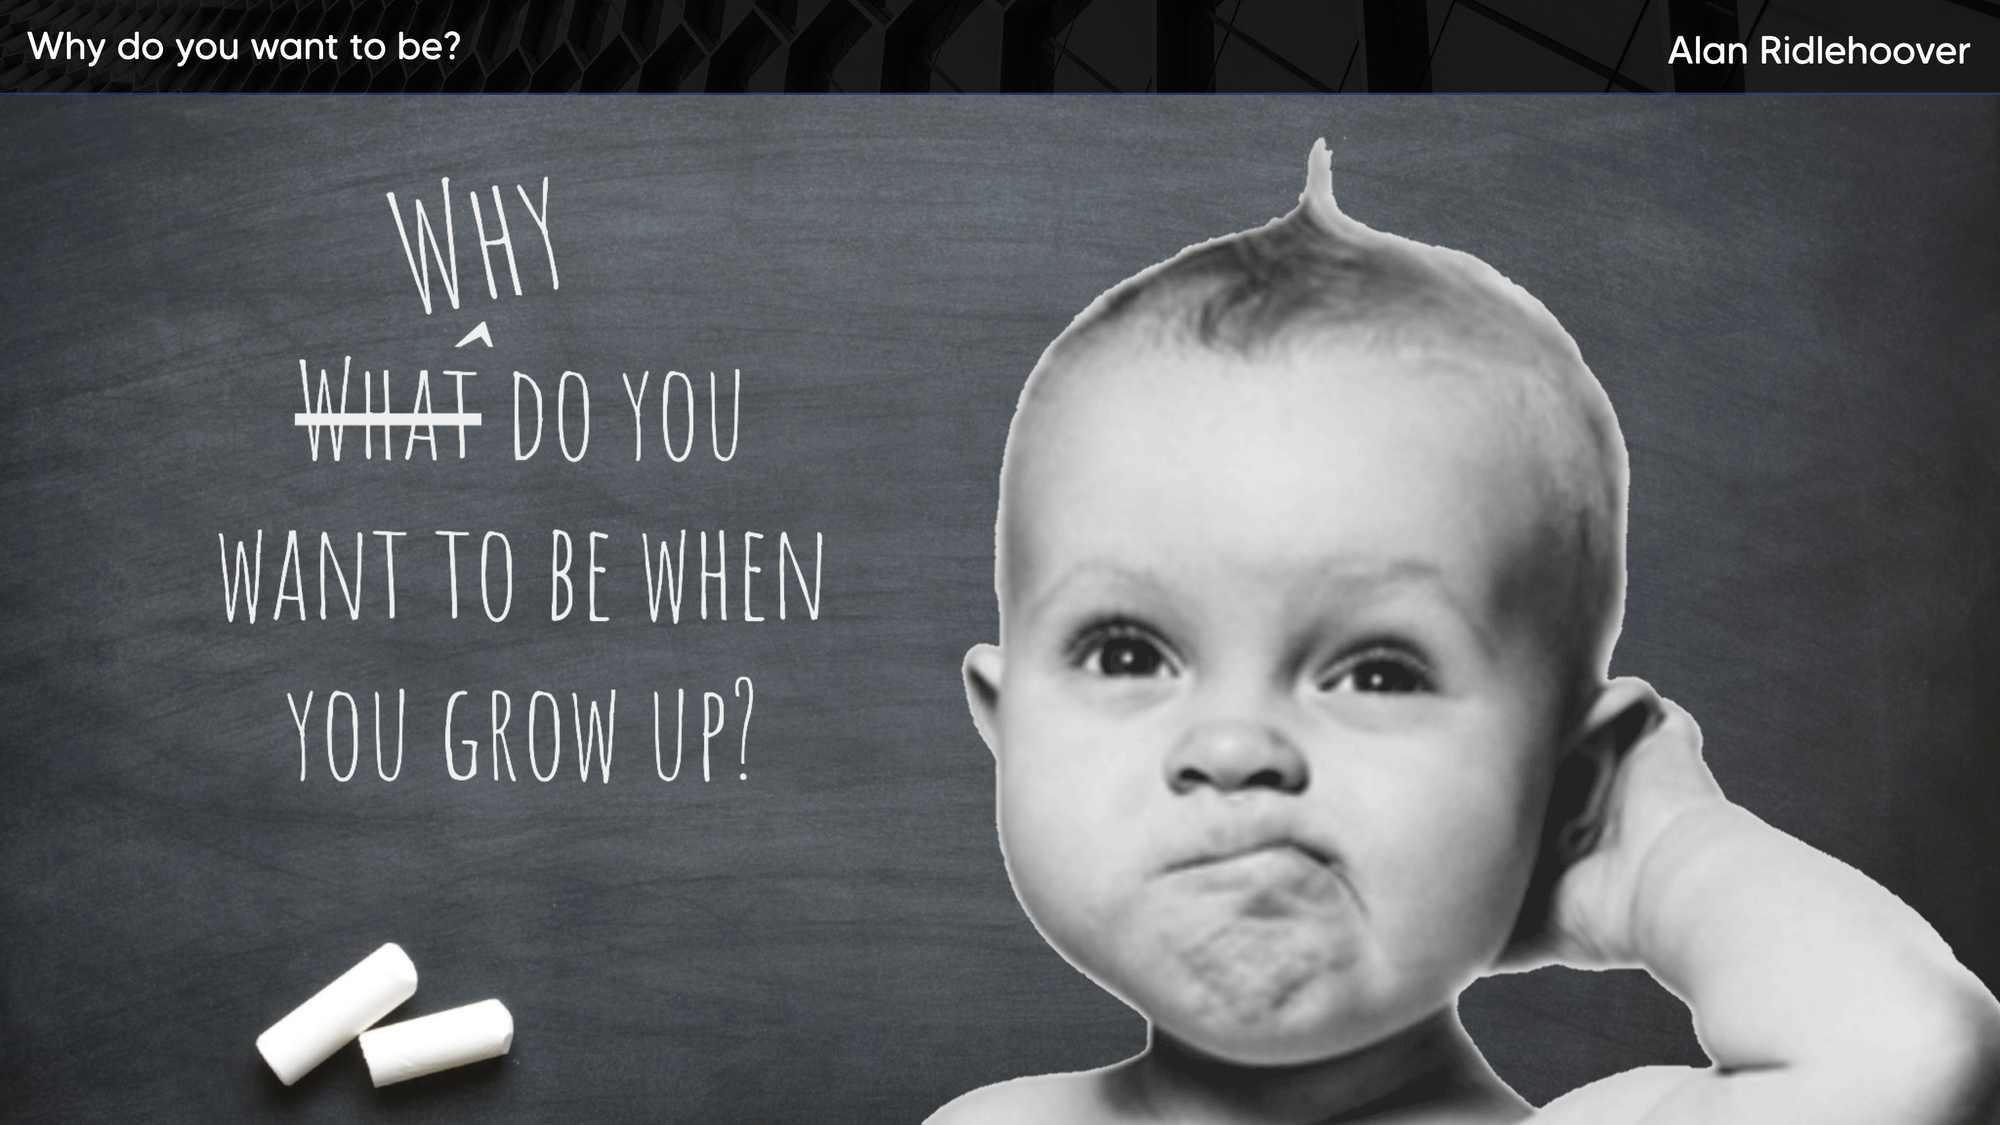 Alan Ridlehoover's Leadership Deck - Why do you want to be? slide with text on a whiteboard that reads "What do you want to be when you grow up?" and a todler with a puzzled look on his face superimposed - the word What is scratched out and replaced with the word Why